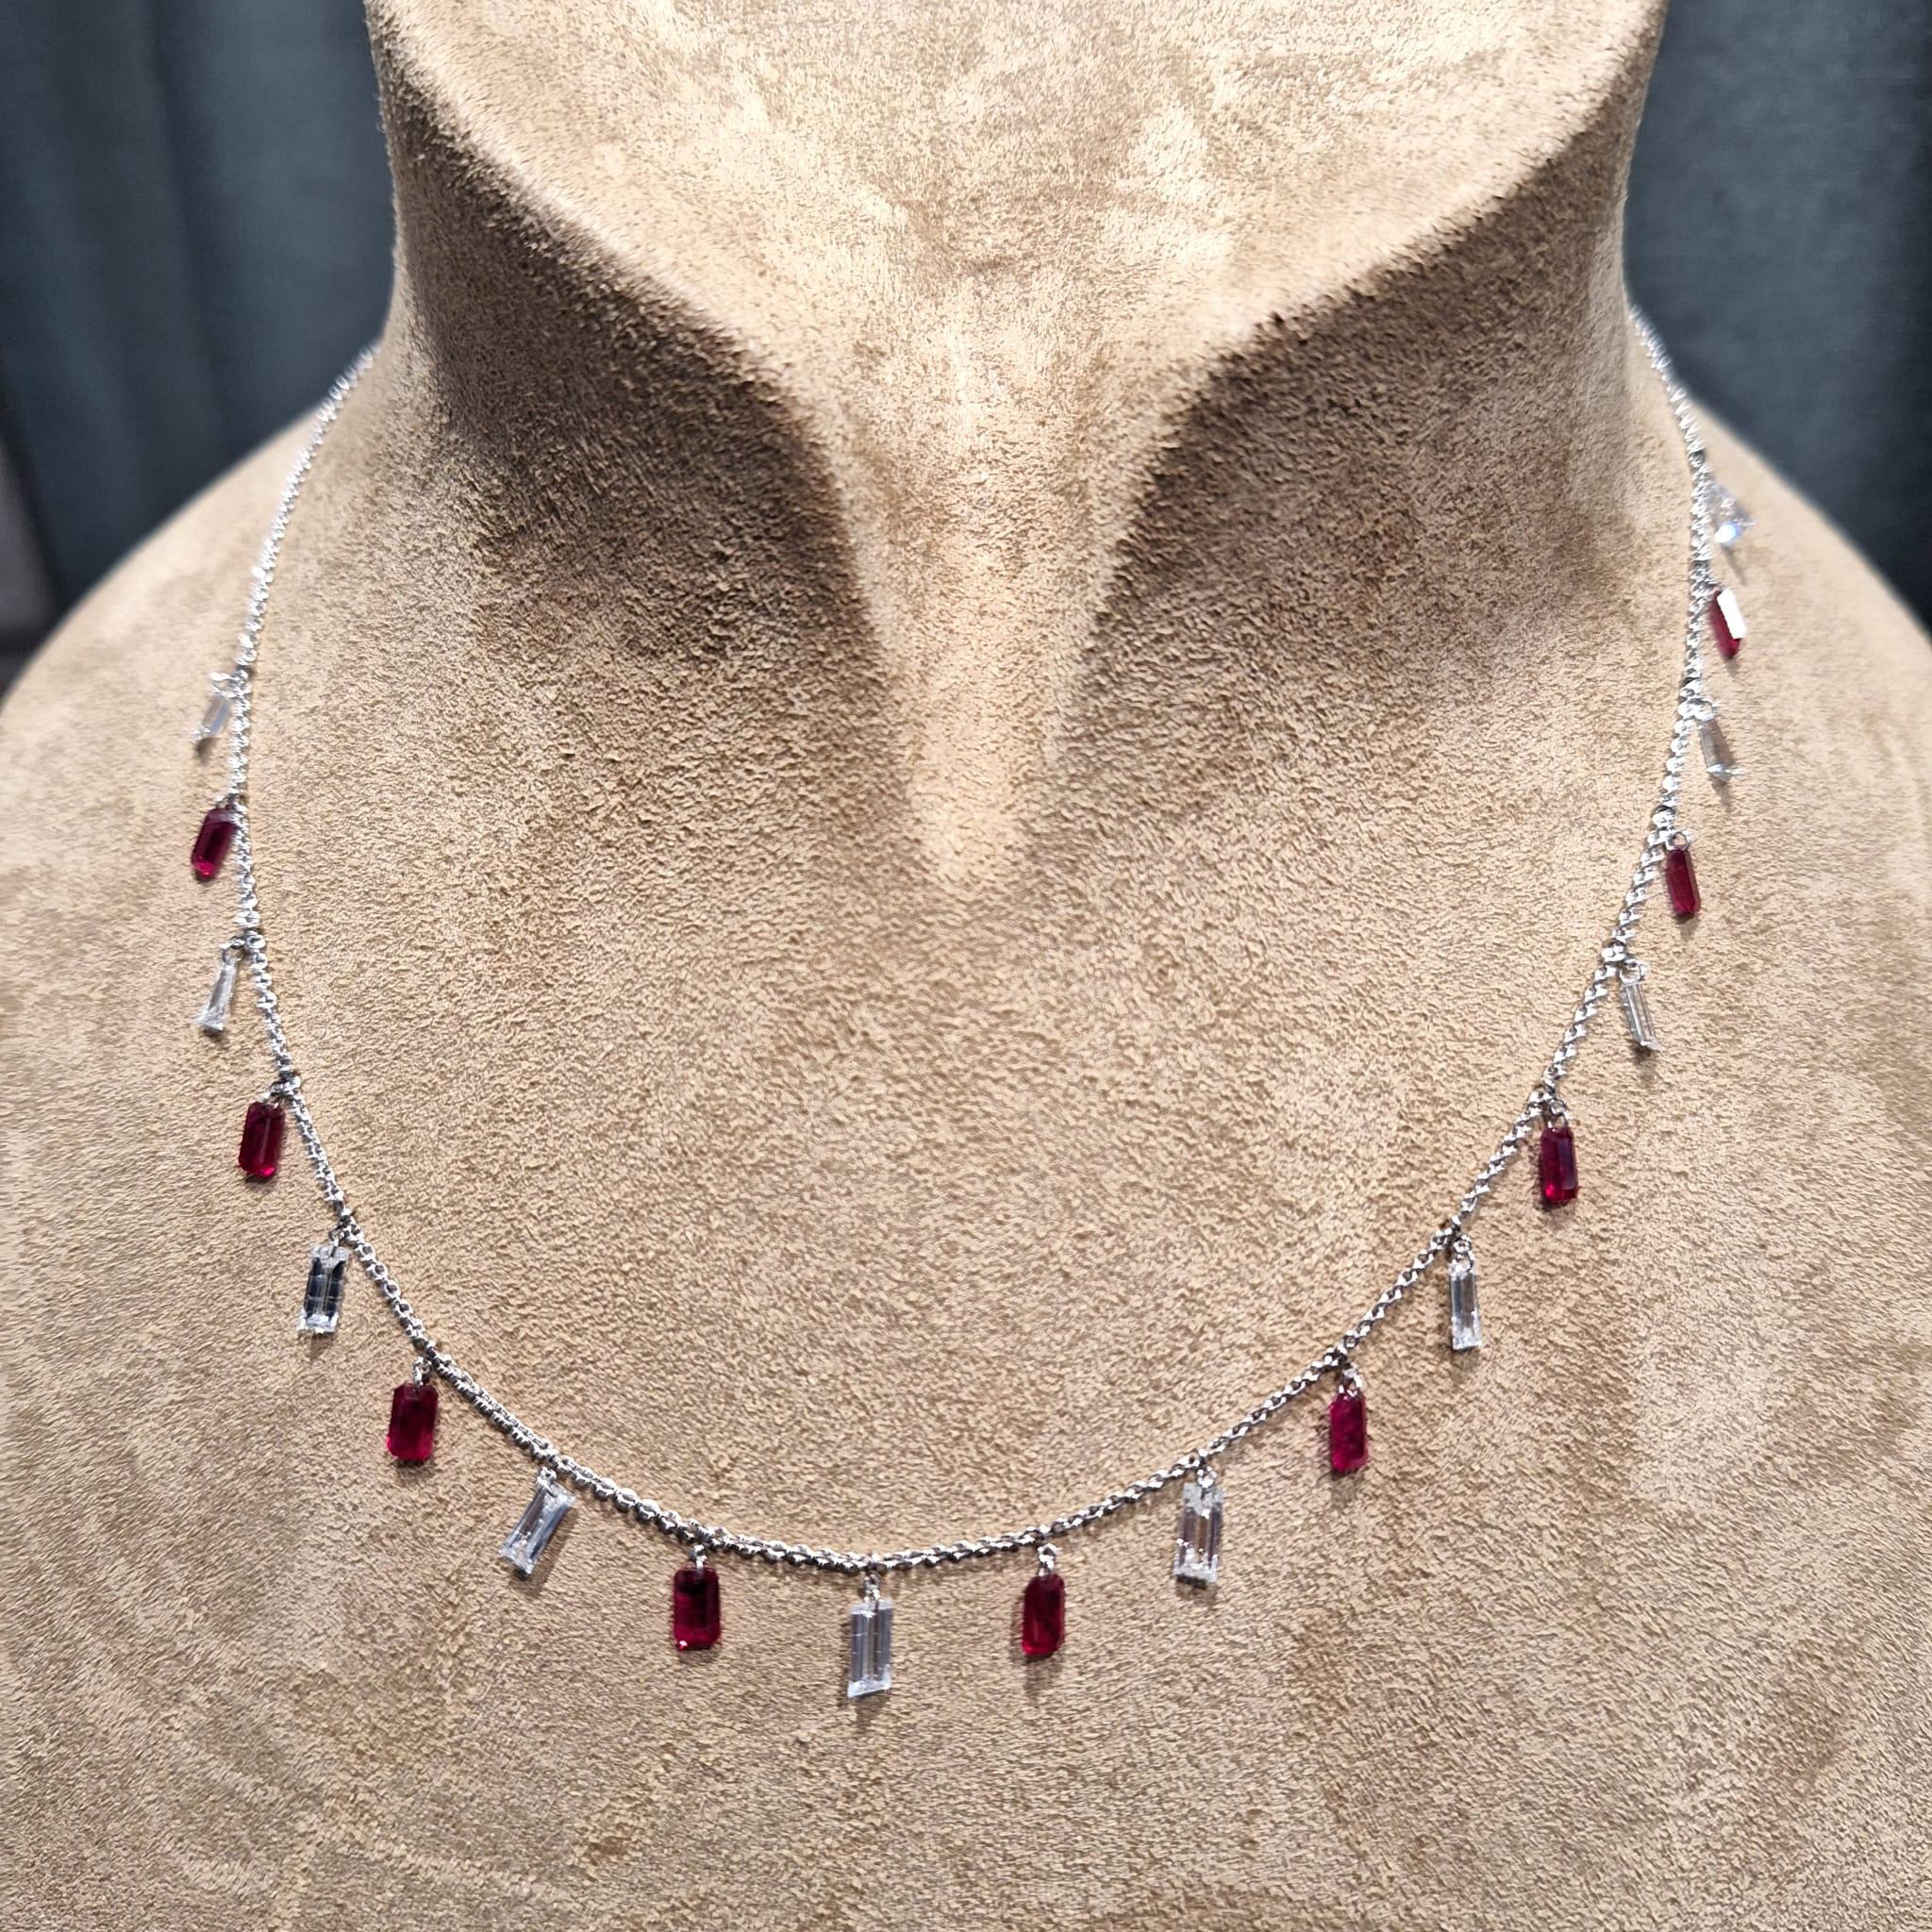 18K White Gold Diamond Necklace with Ruby

Ruby is a stone of passion, protection, and prosperity, symbolizing the sun and imbued with an intense life force that wards off negativity and psychic attacks.

Diamonds symbolise clarity and purity, also